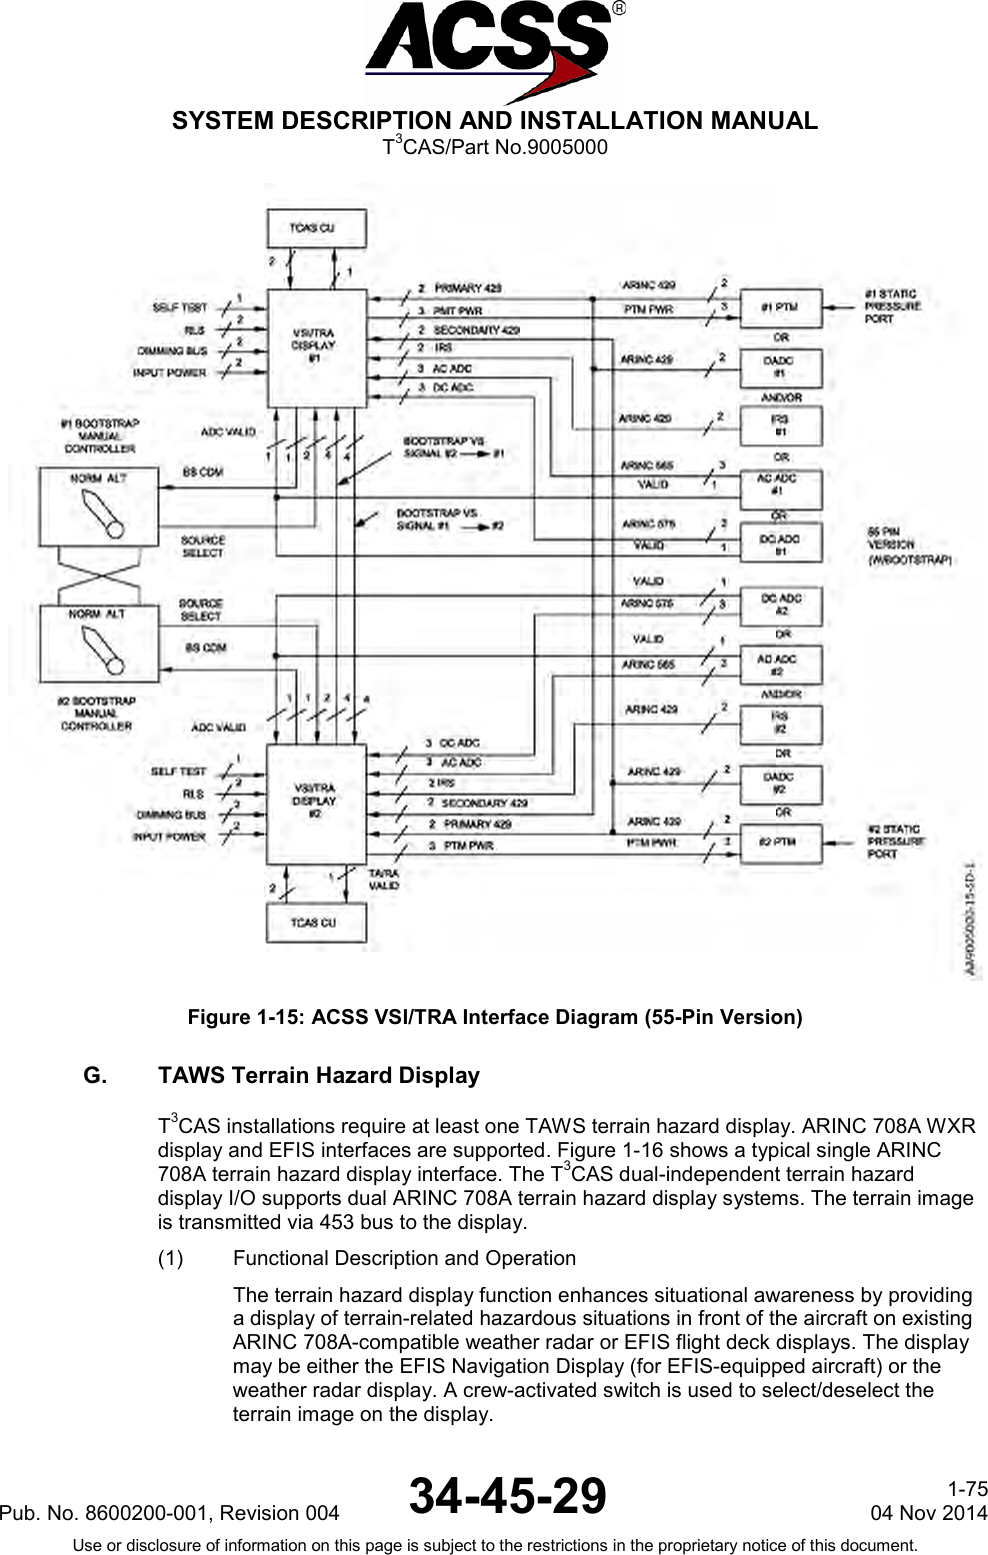  SYSTEM DESCRIPTION AND INSTALLATION MANUAL T3CAS/Part No.9005000  Figure 1-15: ACSS VSI/TRA Interface Diagram (55-Pin Version) G. TAWS Terrain Hazard Display T3CAS installations require at least one TAWS terrain hazard display. ARINC 708A WXR display and EFIS interfaces are supported. Figure 1-16 shows a typical single ARINC 708A terrain hazard display interface. The T3CAS dual-independent terrain hazard display I/O supports dual ARINC 708A terrain hazard display systems. The terrain image is transmitted via 453 bus to the display. (1) Functional Description and Operation The terrain hazard display function enhances situational awareness by providing a display of terrain-related hazardous situations in front of the aircraft on existing ARINC 708A-compatible weather radar or EFIS flight deck displays. The display may be either the EFIS Navigation Display (for EFIS-equipped aircraft) or the weather radar display. A crew-activated switch is used to select/deselect the terrain image on the display. Pub. No. 8600200-001, Revision 004 34-45-29 1-75 04 Nov 2014 Use or disclosure of information on this page is subject to the restrictions in the proprietary notice of this document.  